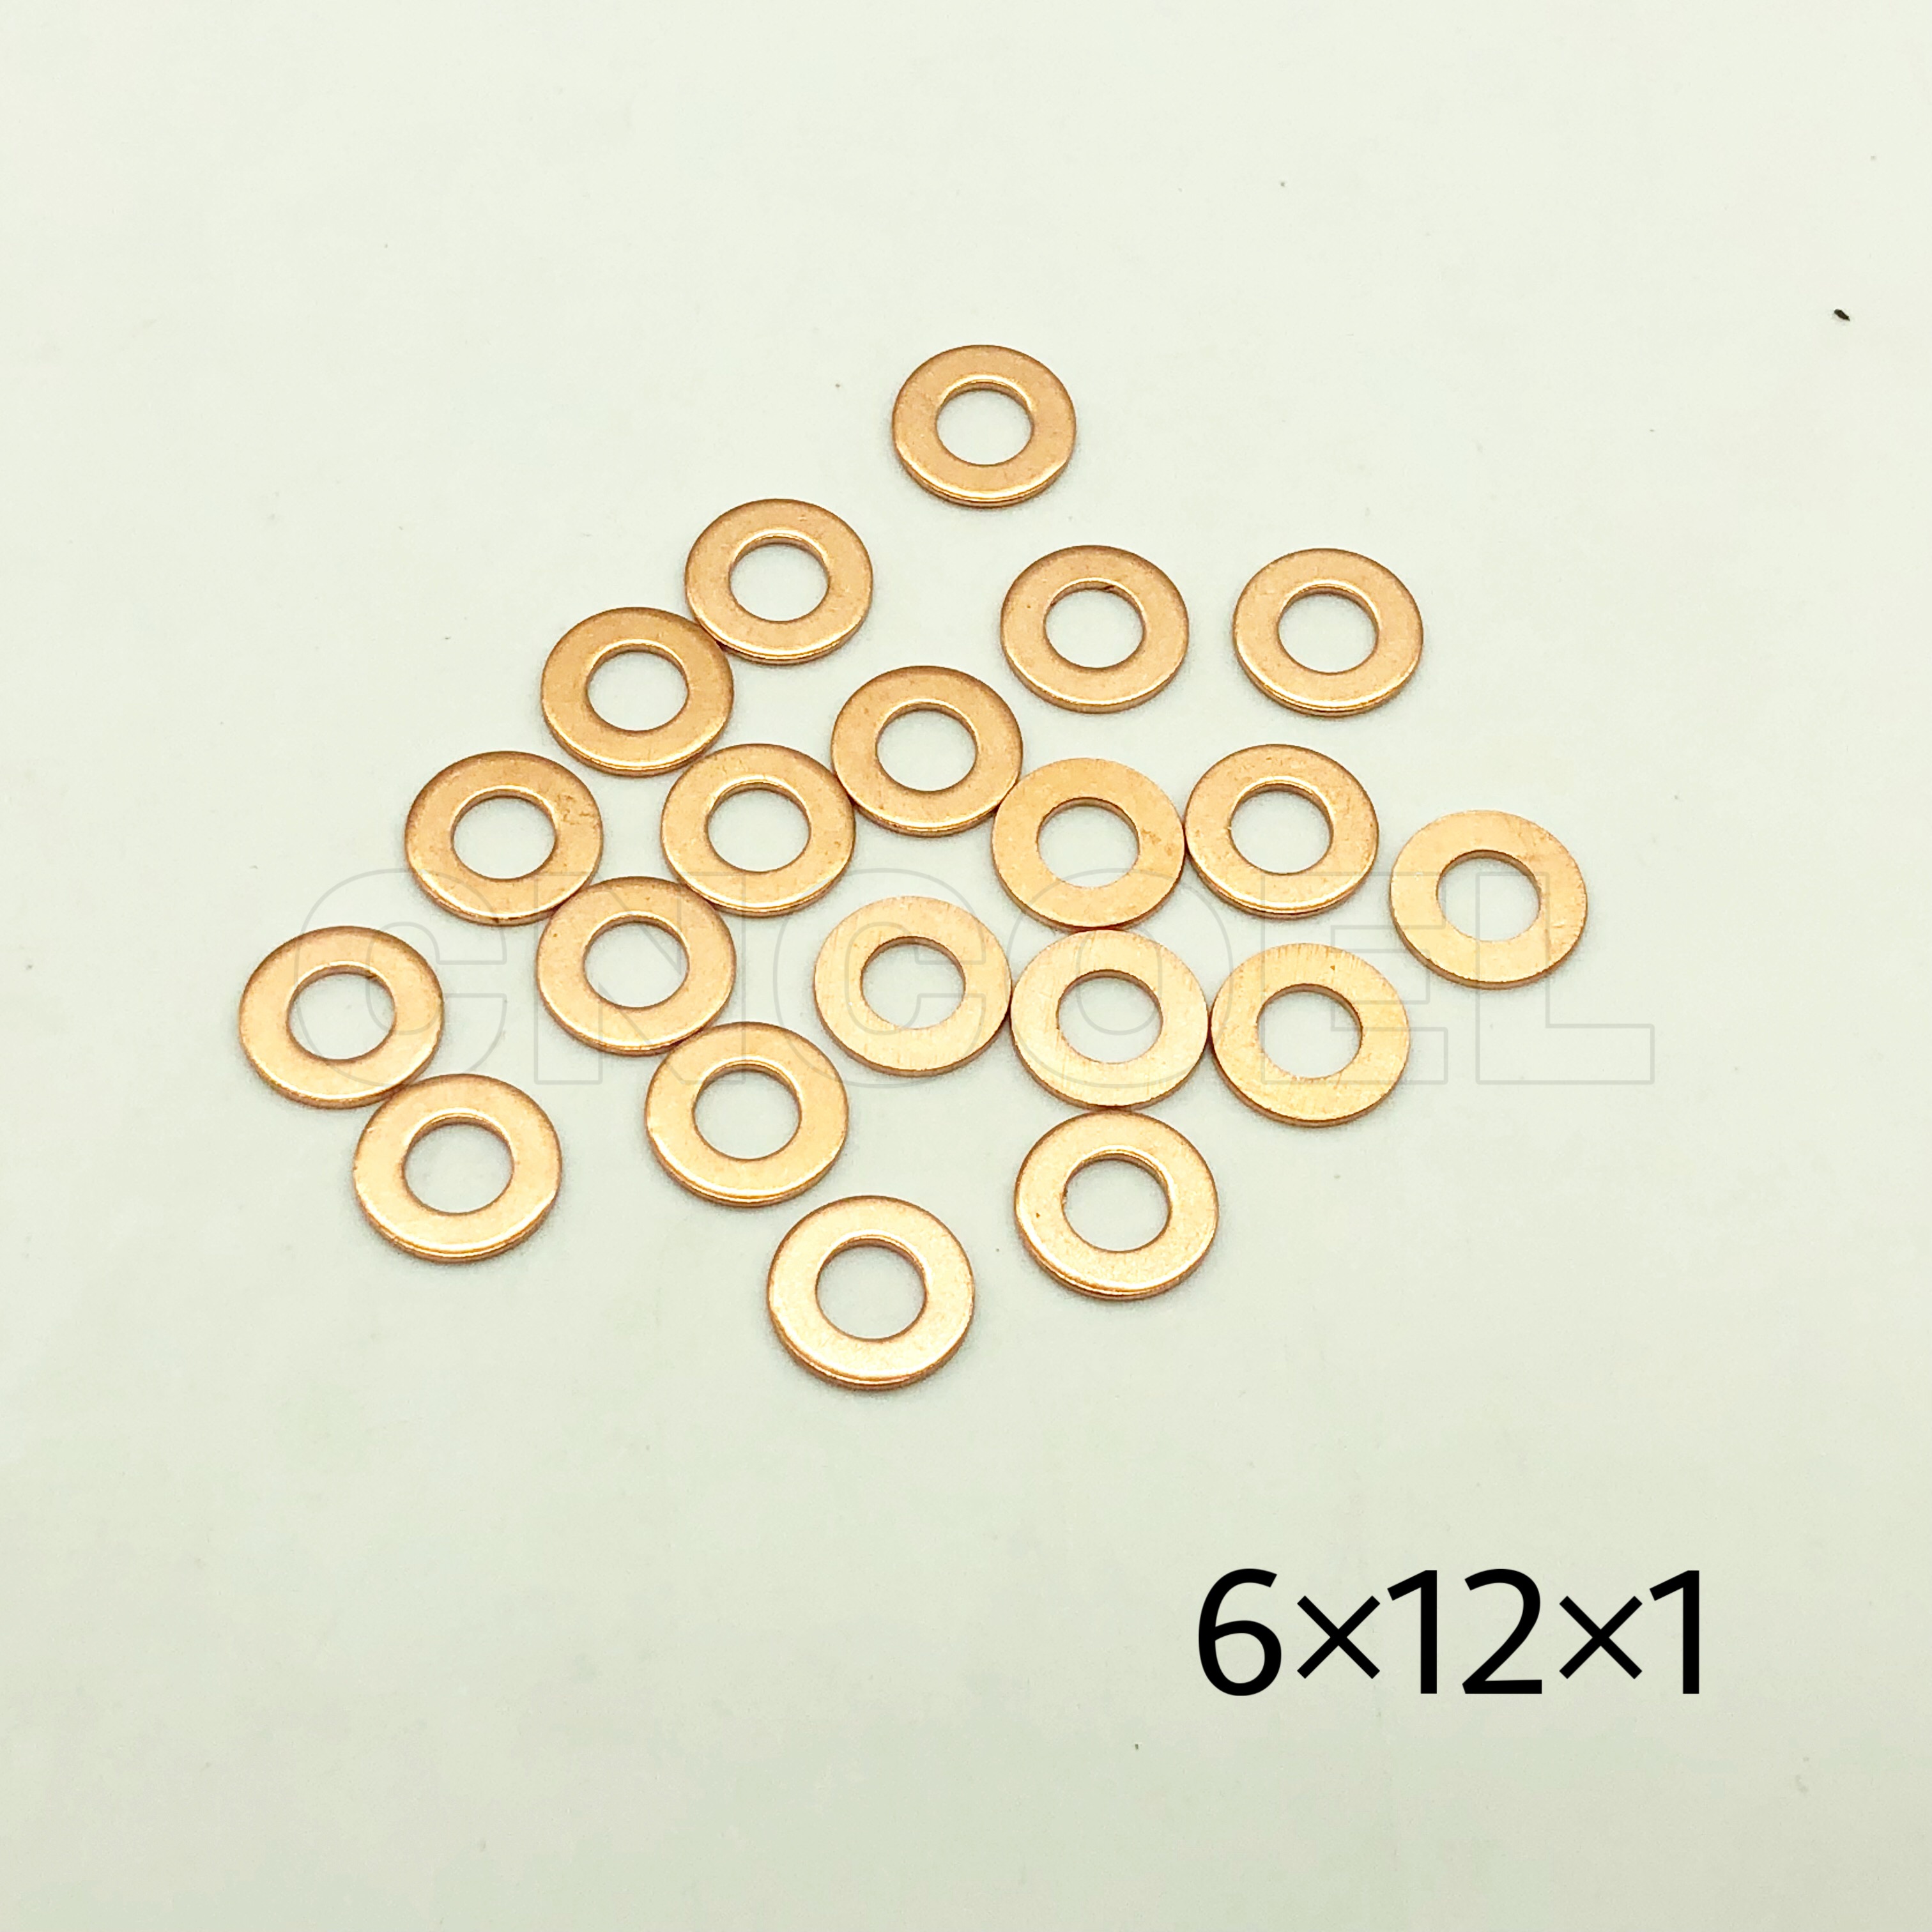 20Pcs Solid Copper Washer Flat Ring Gasket Sump Plug Oil Seal Fittings M10 M8 M6 M5 M14 M16 Fastener Hardware Accessories